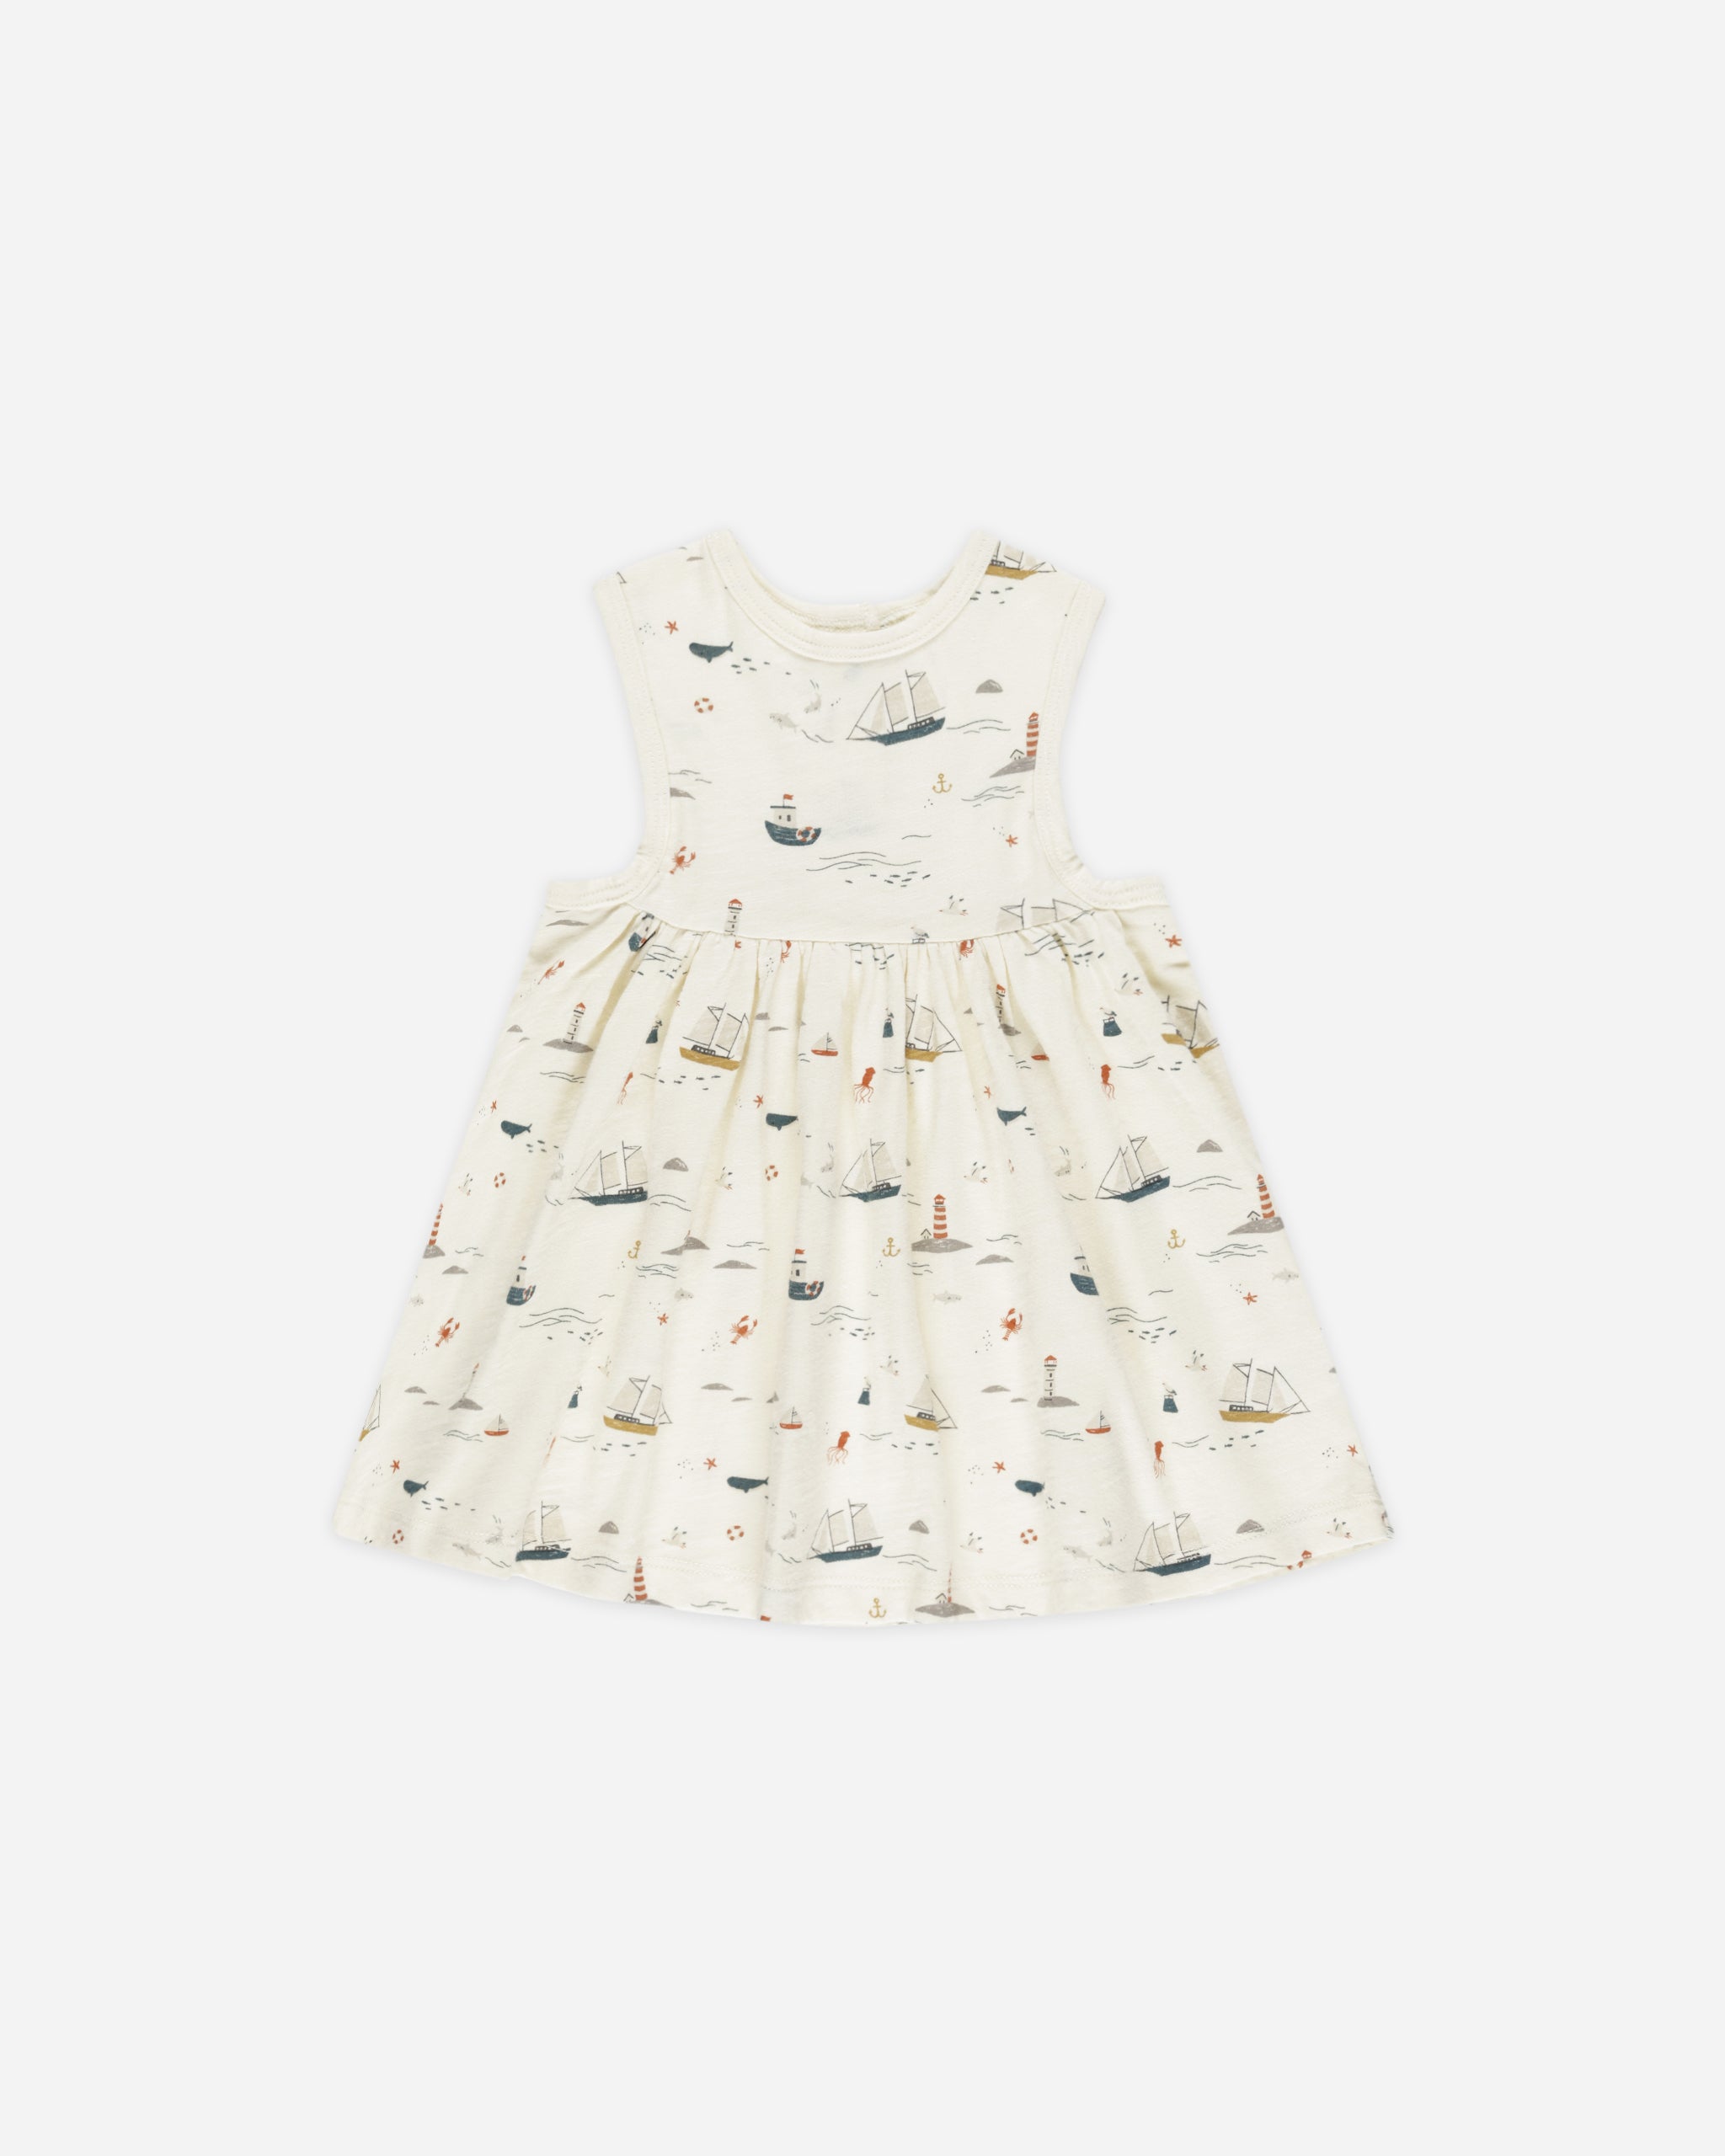 Layla Dress || Nautical - Rylee + Cru | Kids Clothes | Trendy Baby Clothes | Modern Infant Outfits |